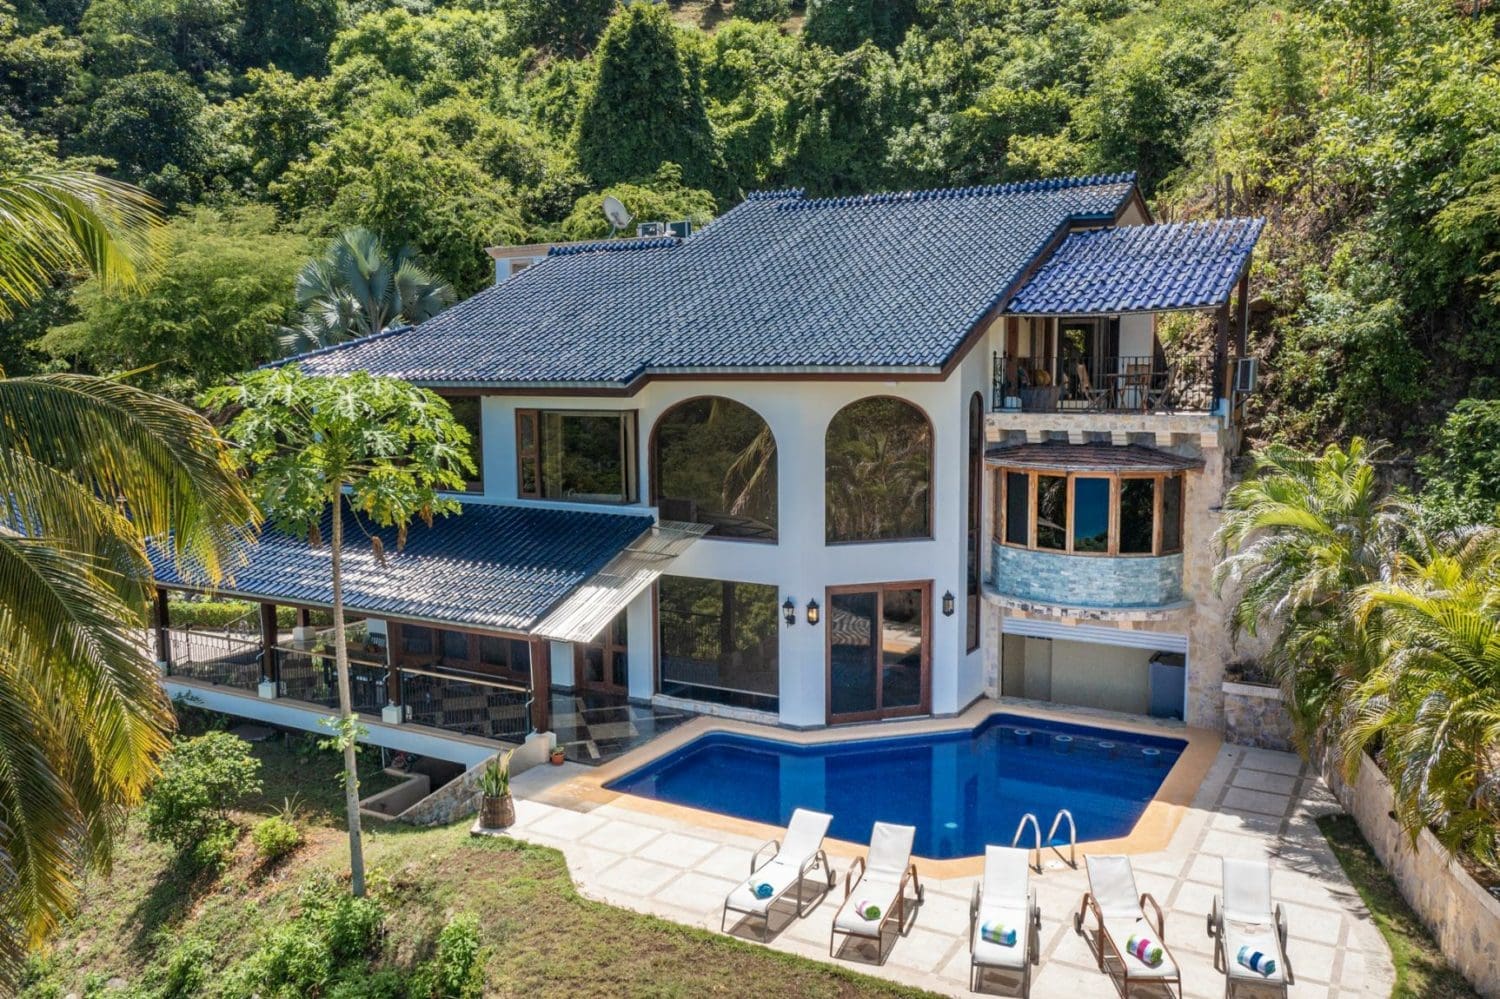 How to buy a home in Costa Rica